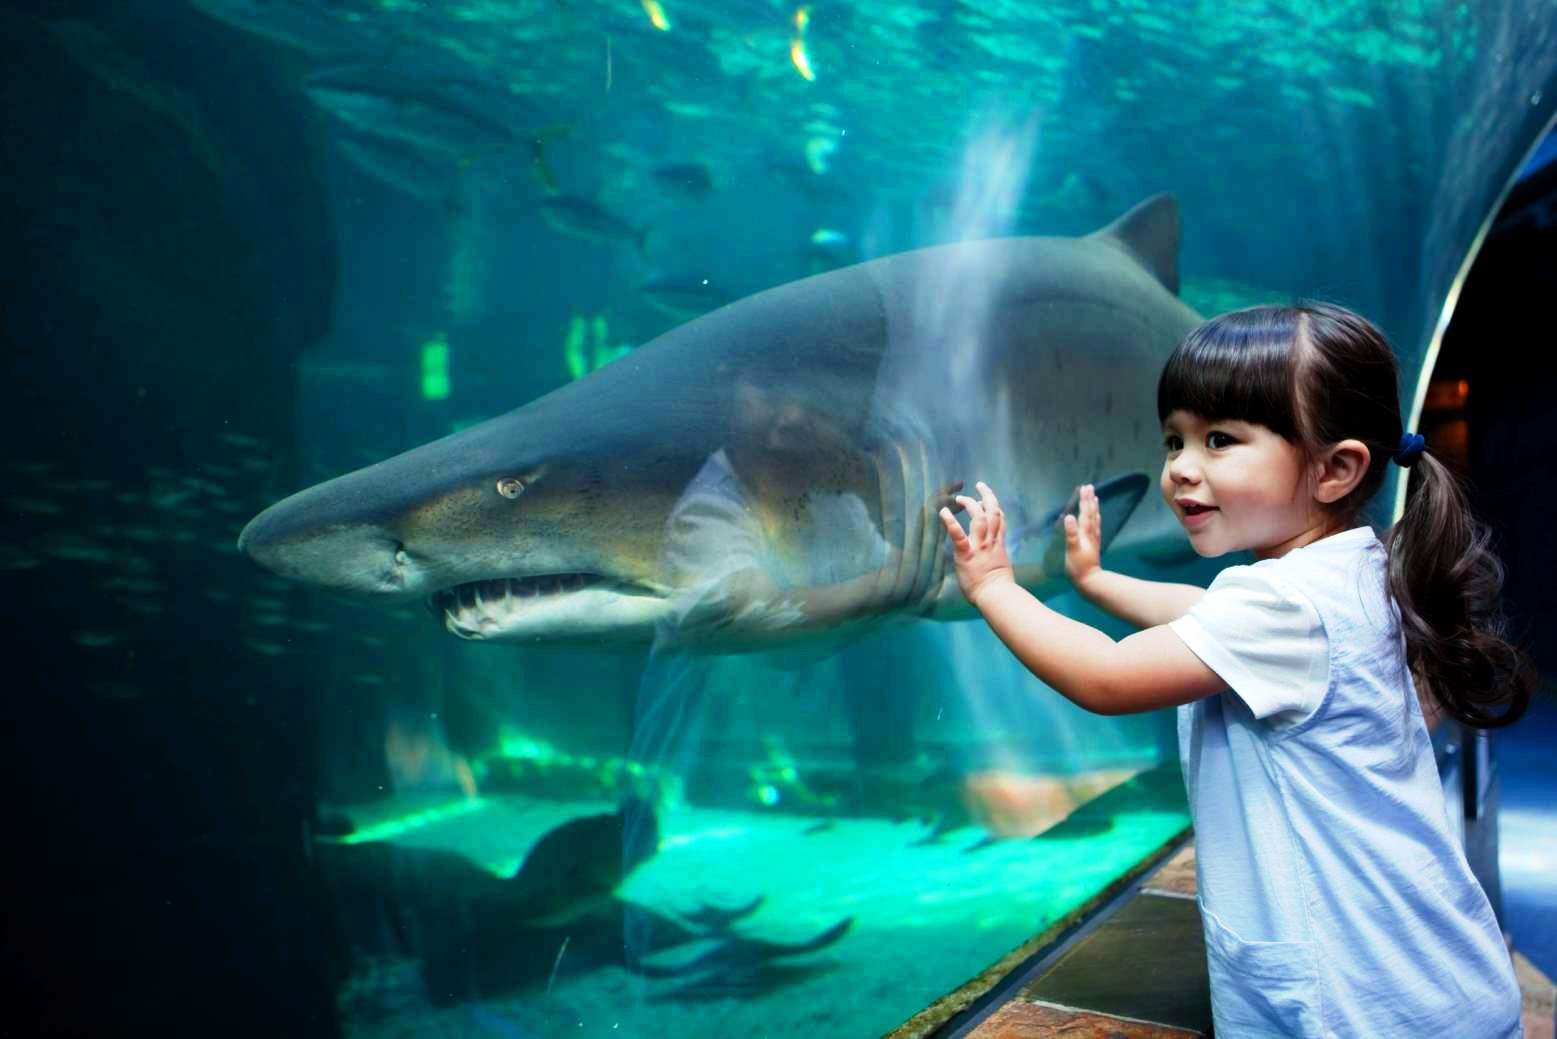 Surrounding Aquarium is one of the best attractions in Cape Town